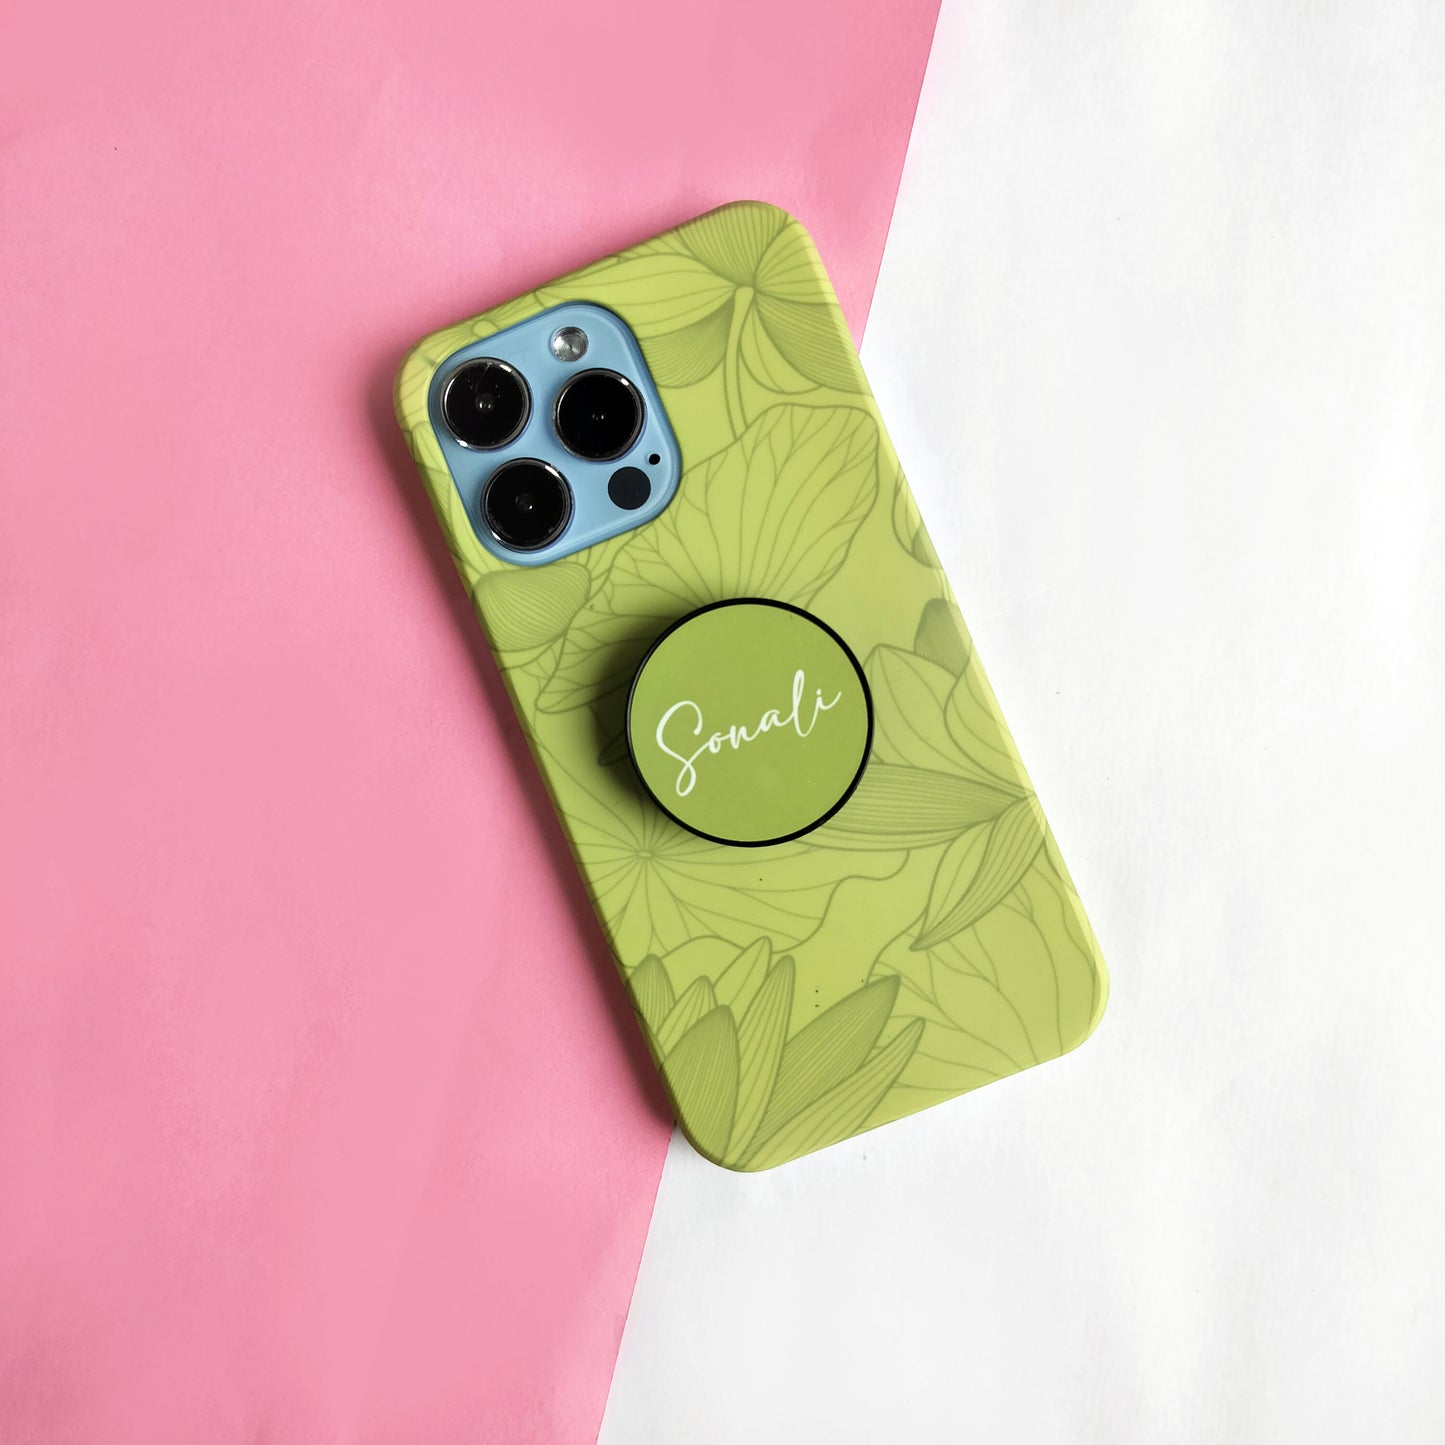 luxury leaves Hard Matte Case Covers Color Green For iPhone